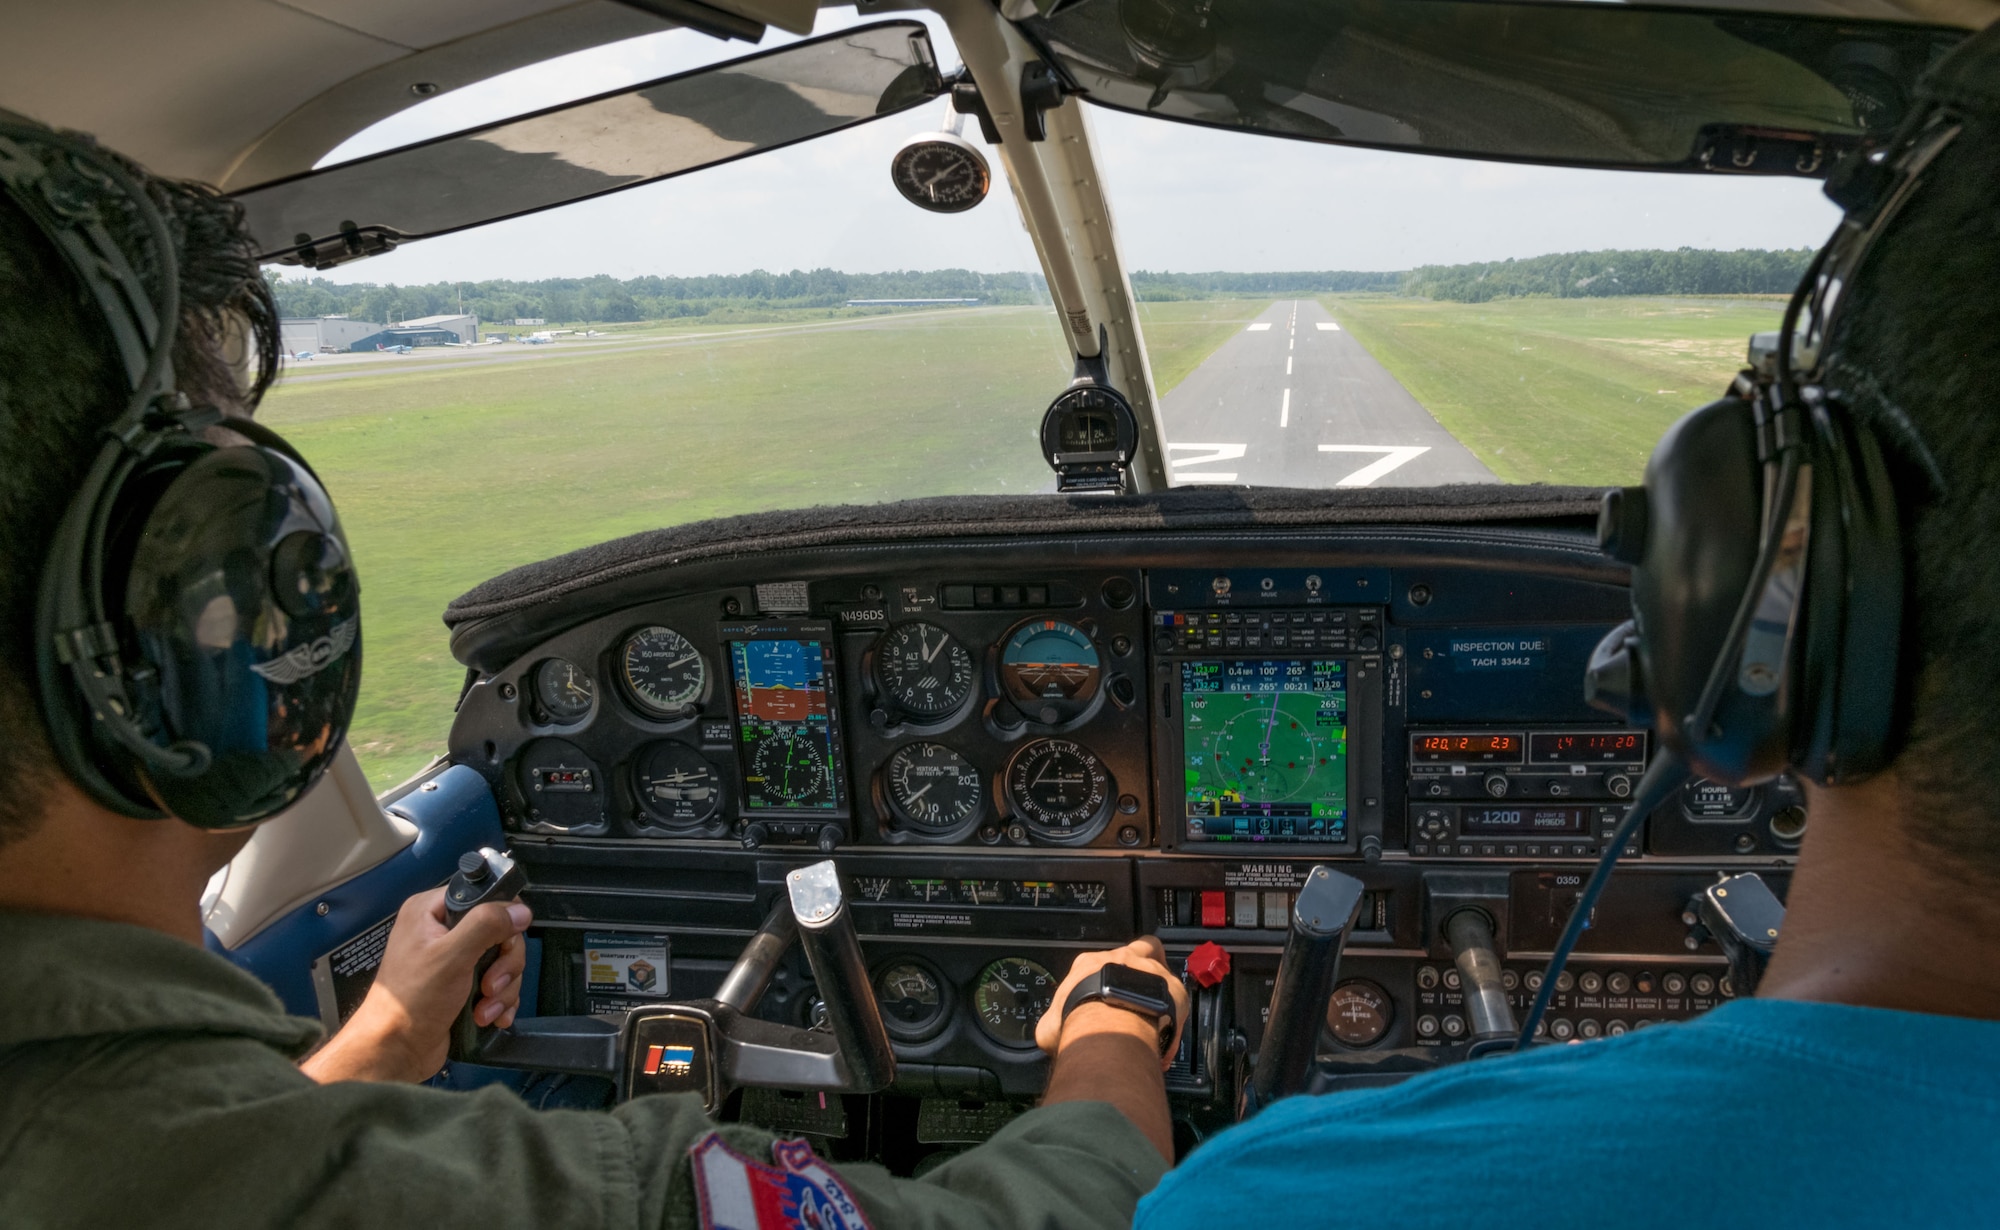 Mohammad Ahmed, Delaware State University certified flight instructor, points out flight instrumentation to Air Force Junior Reserve Officers’ Training Corps cadet Isaac Victorino, as he flies the Piper Warrior II in for a touch and go landing Aug. 6, 2019, at Delaware Airpark in Cheswold, Del. Under the guidance of Ahmed, Victorino flew around the airpark and practiced skills he learned during the eight-week AF JROTC Summer Flight Academy held at DSU in Dover. Victorino is a cadet with AFROTC Detachment 842, University of Texas at San Antonio. (U.S. Air Force photo by Roland Balik)